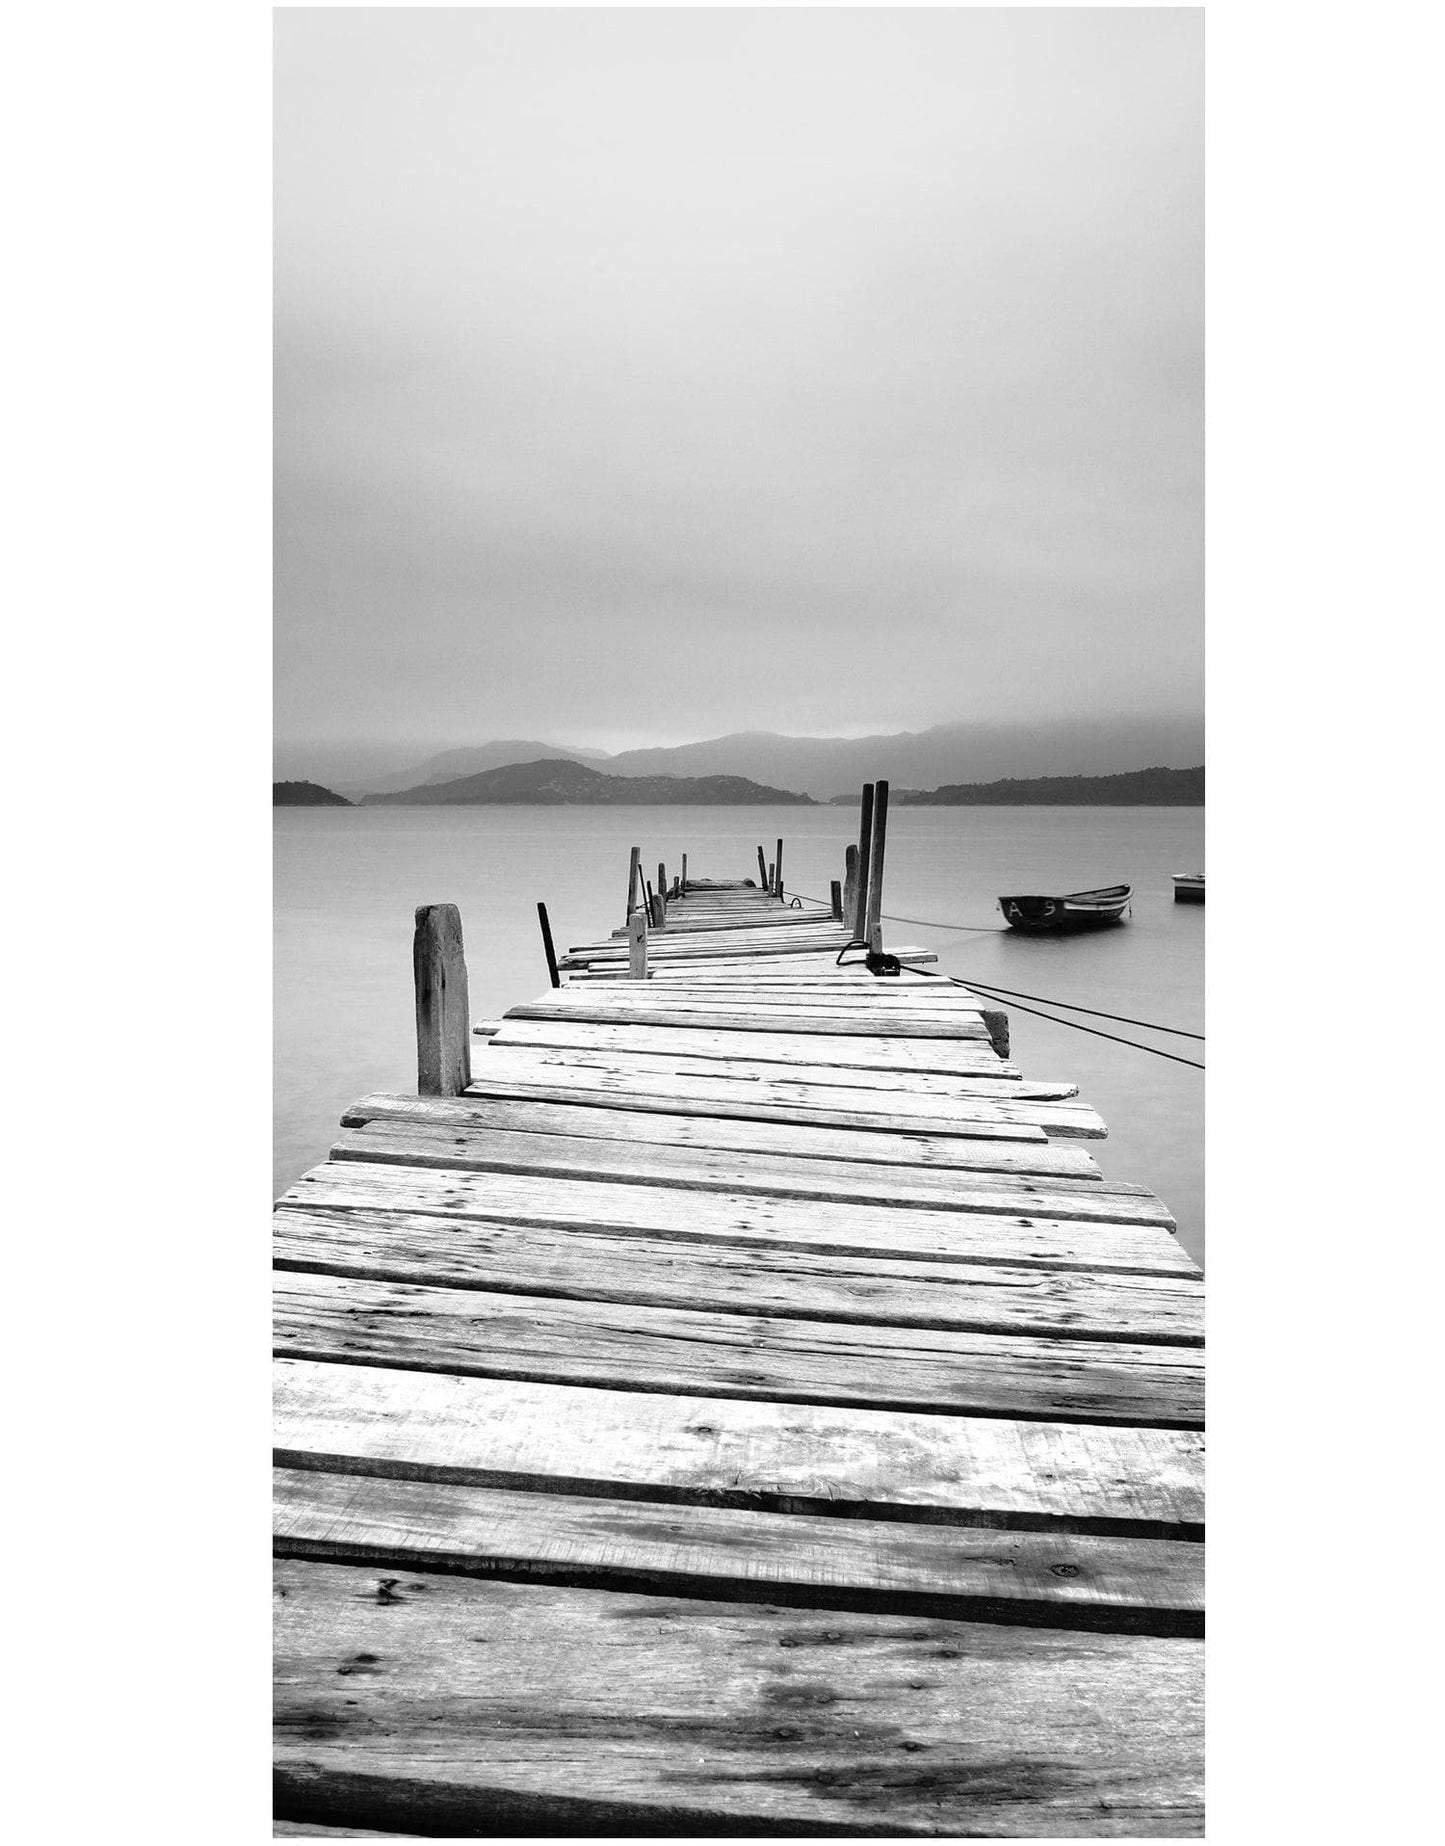 Misty Lake View Boat on Pier Black and White Mural Wall Decal Sticker #6143